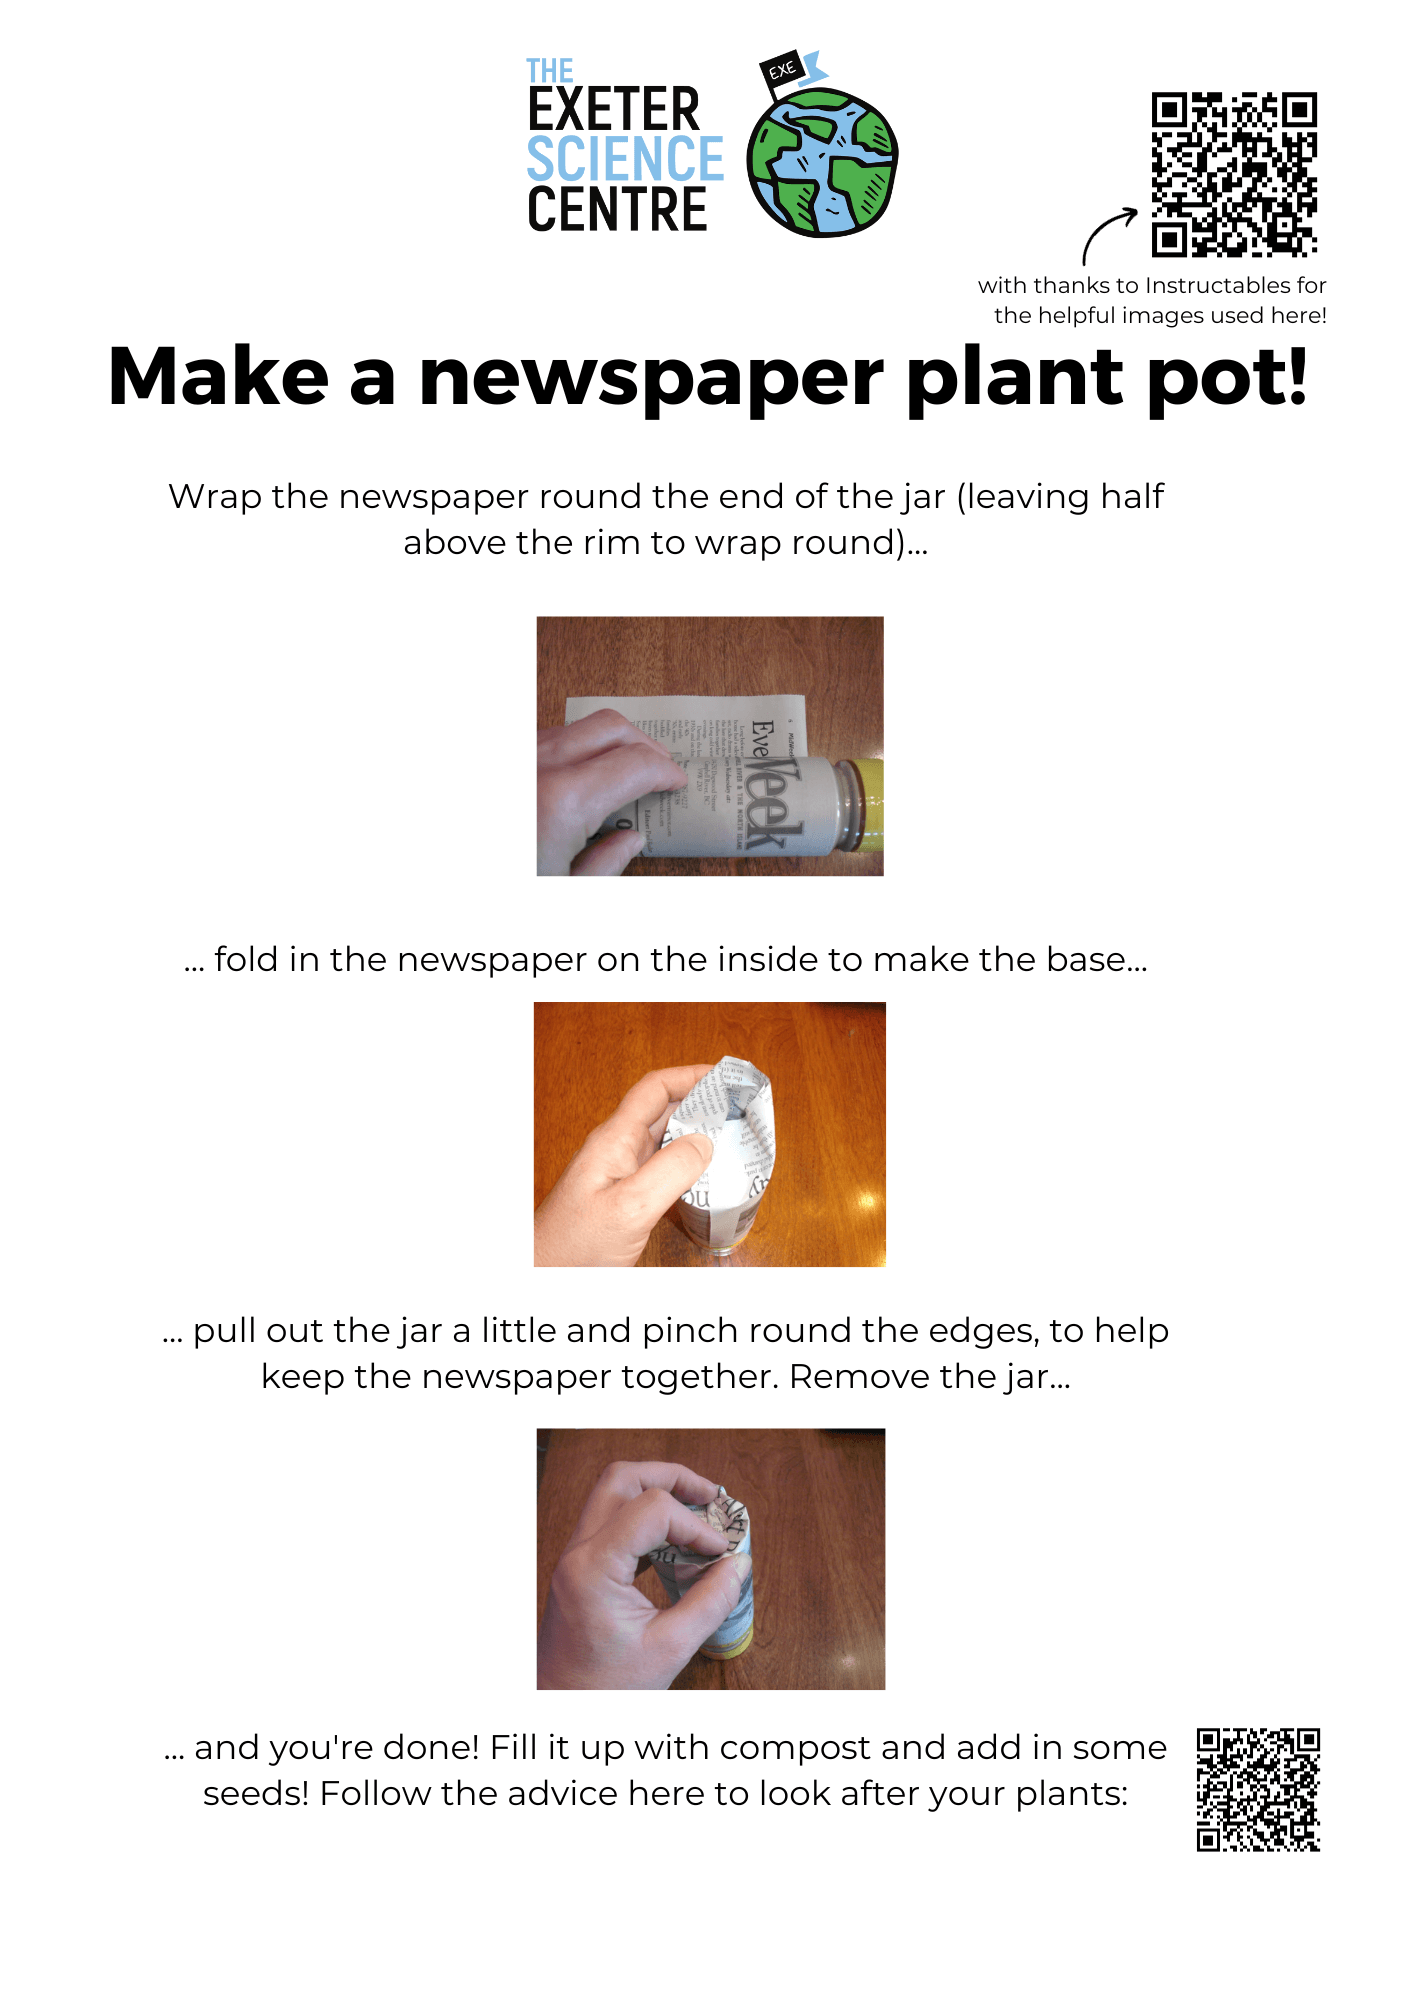 Make a newspaper plant pot! Wrap the newspaper round the end of the jar (leaving half above the rim to wrap round)... fold in the newspaper on the inside to make the base... pull out the jar a little and pinch around the edges, to help keep the newspaper together. Remove the jar... and you're done! Fill it up with compost and add in some seeds!